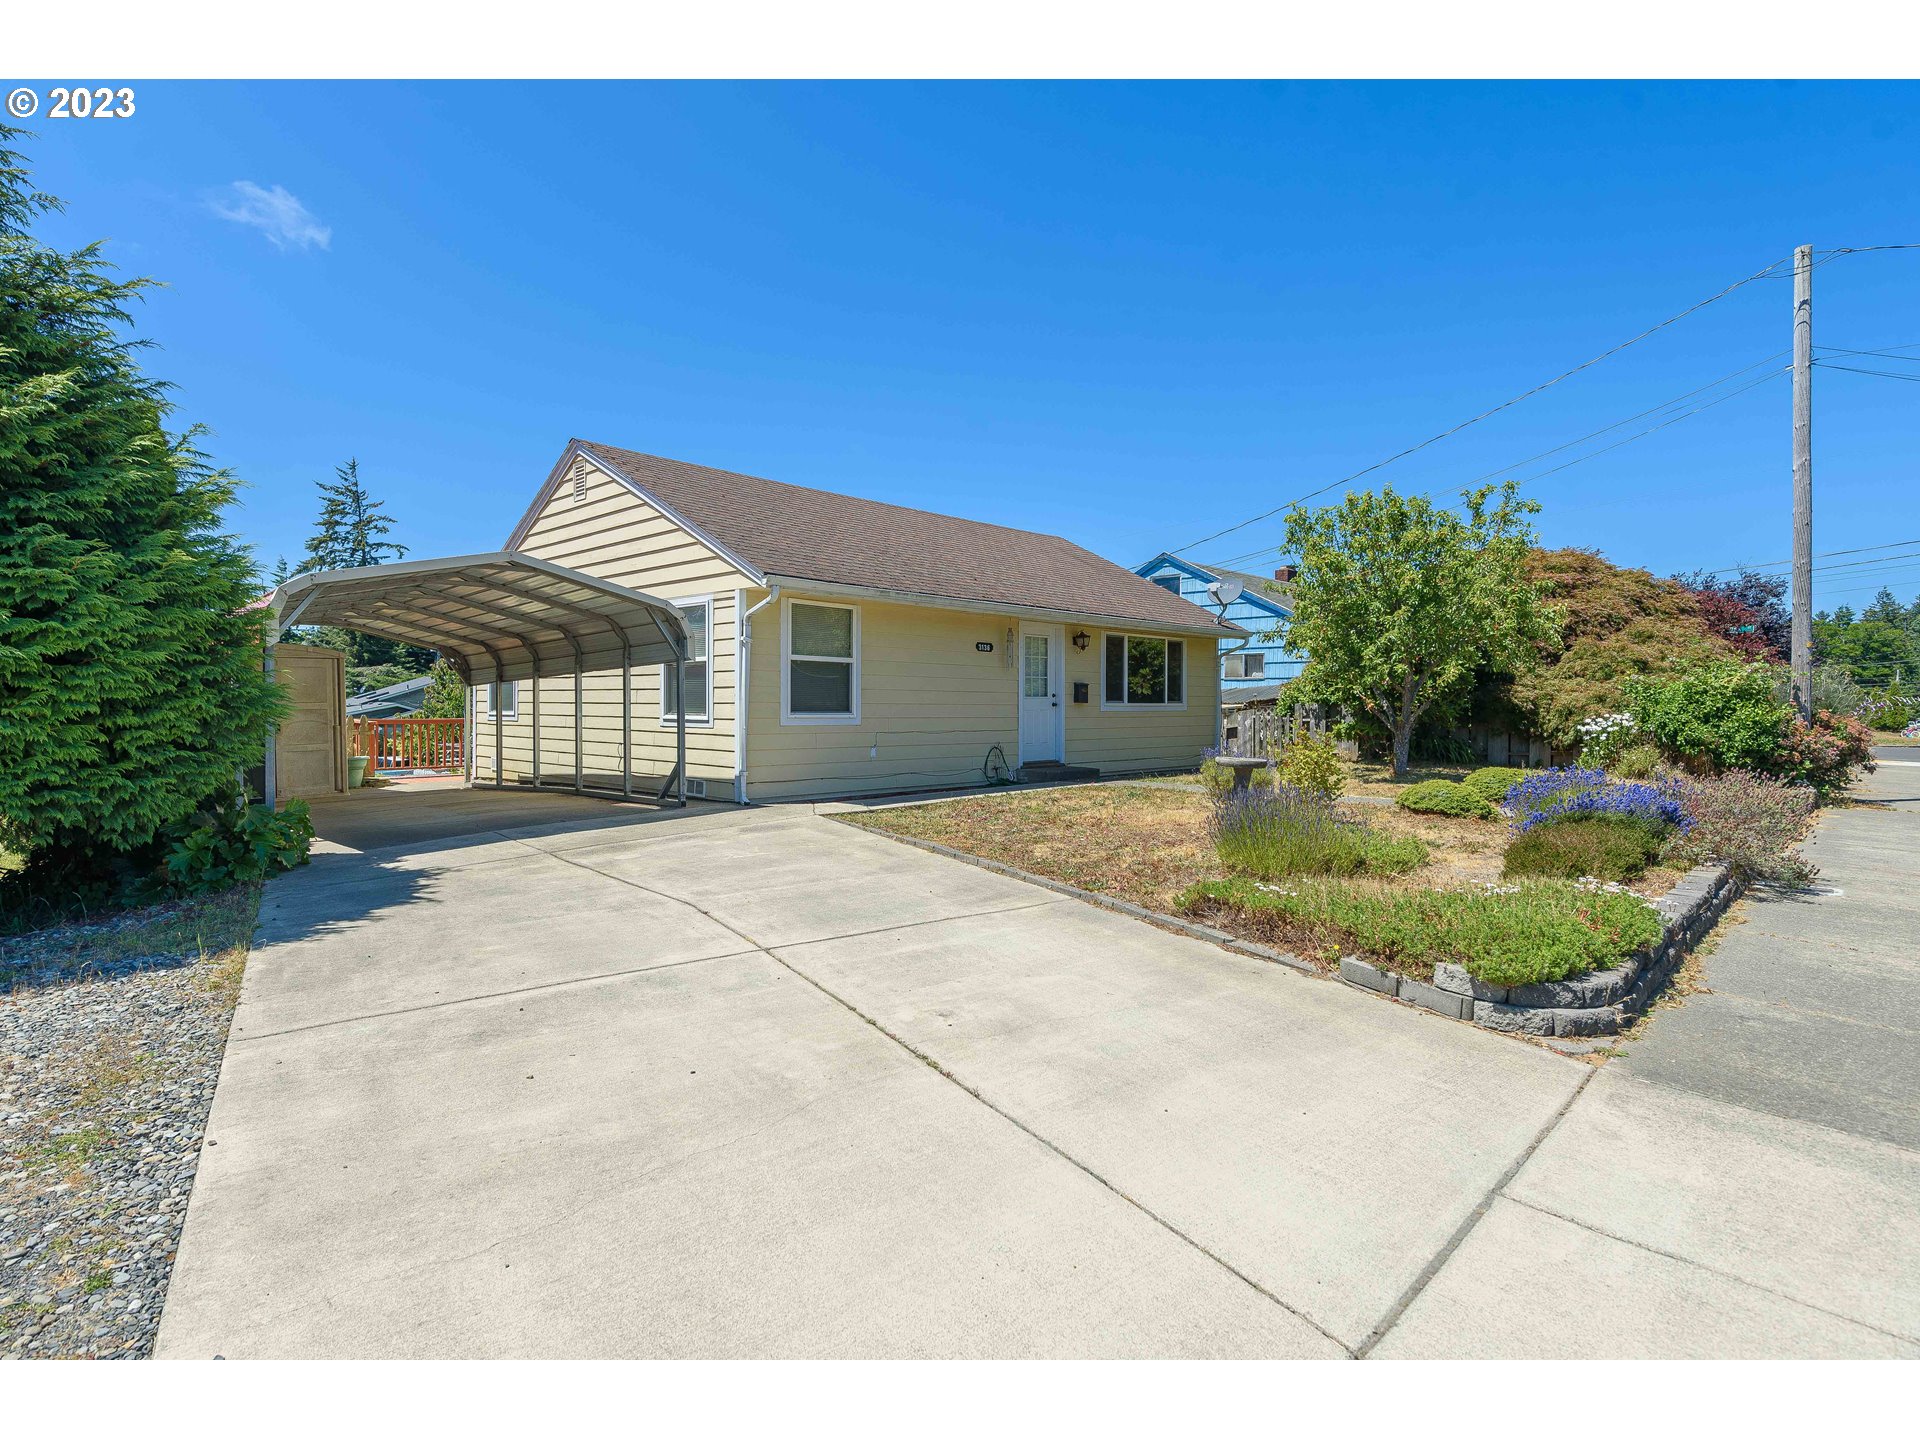 3136 CHESTER ST, North Bend, OR 97459